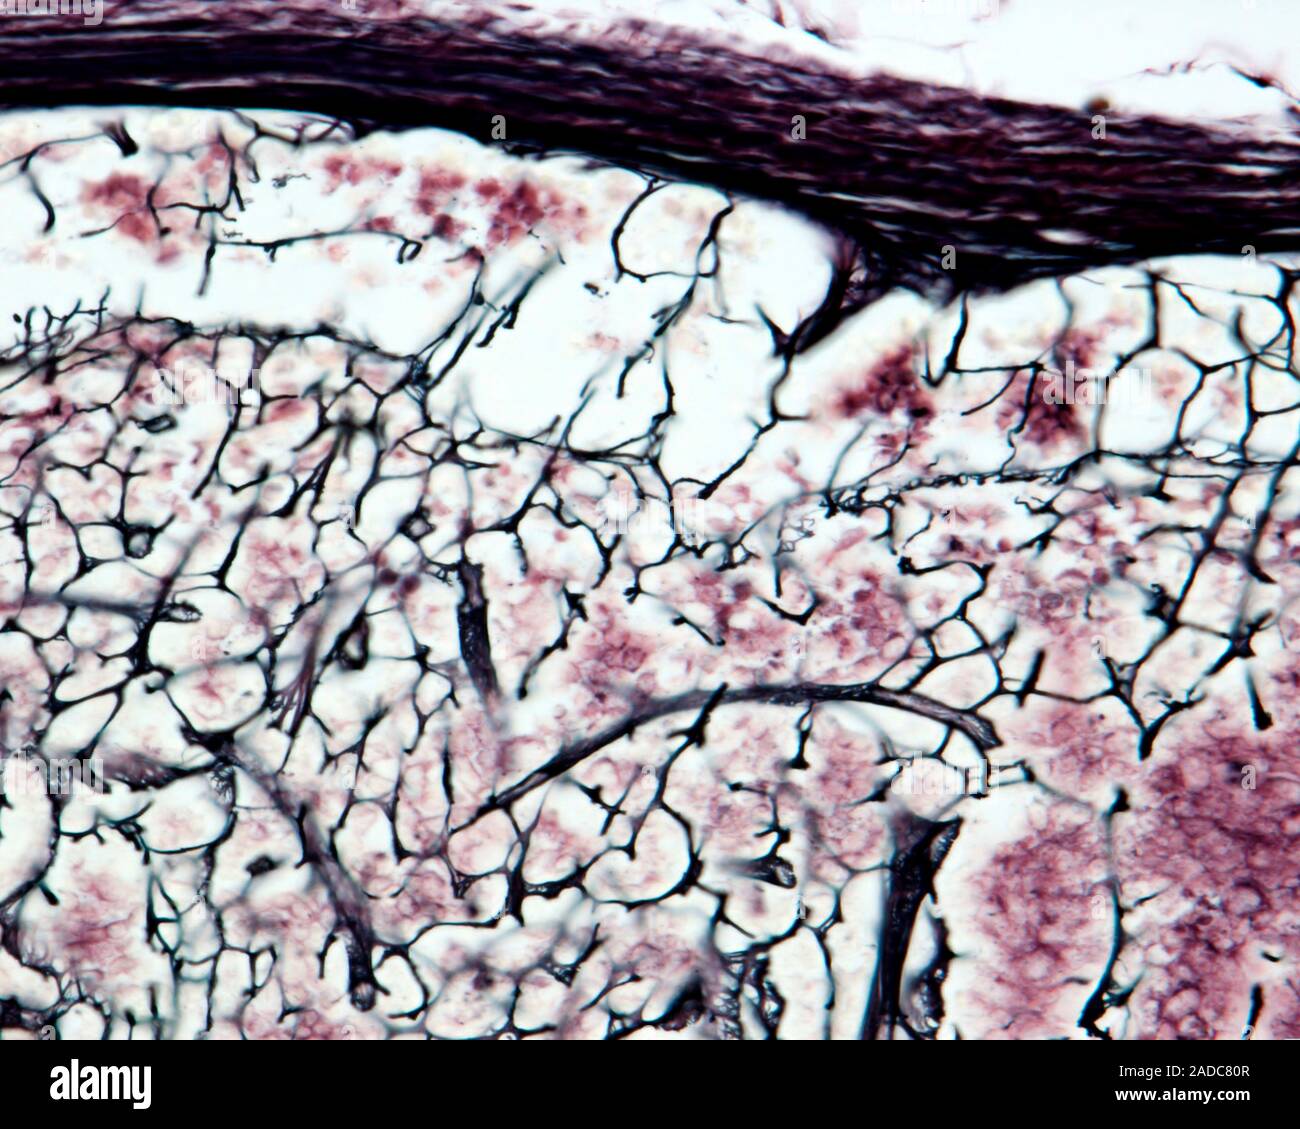 Light Micrograph Of The Peripheral Cortex Of A Lymph Node Stained With